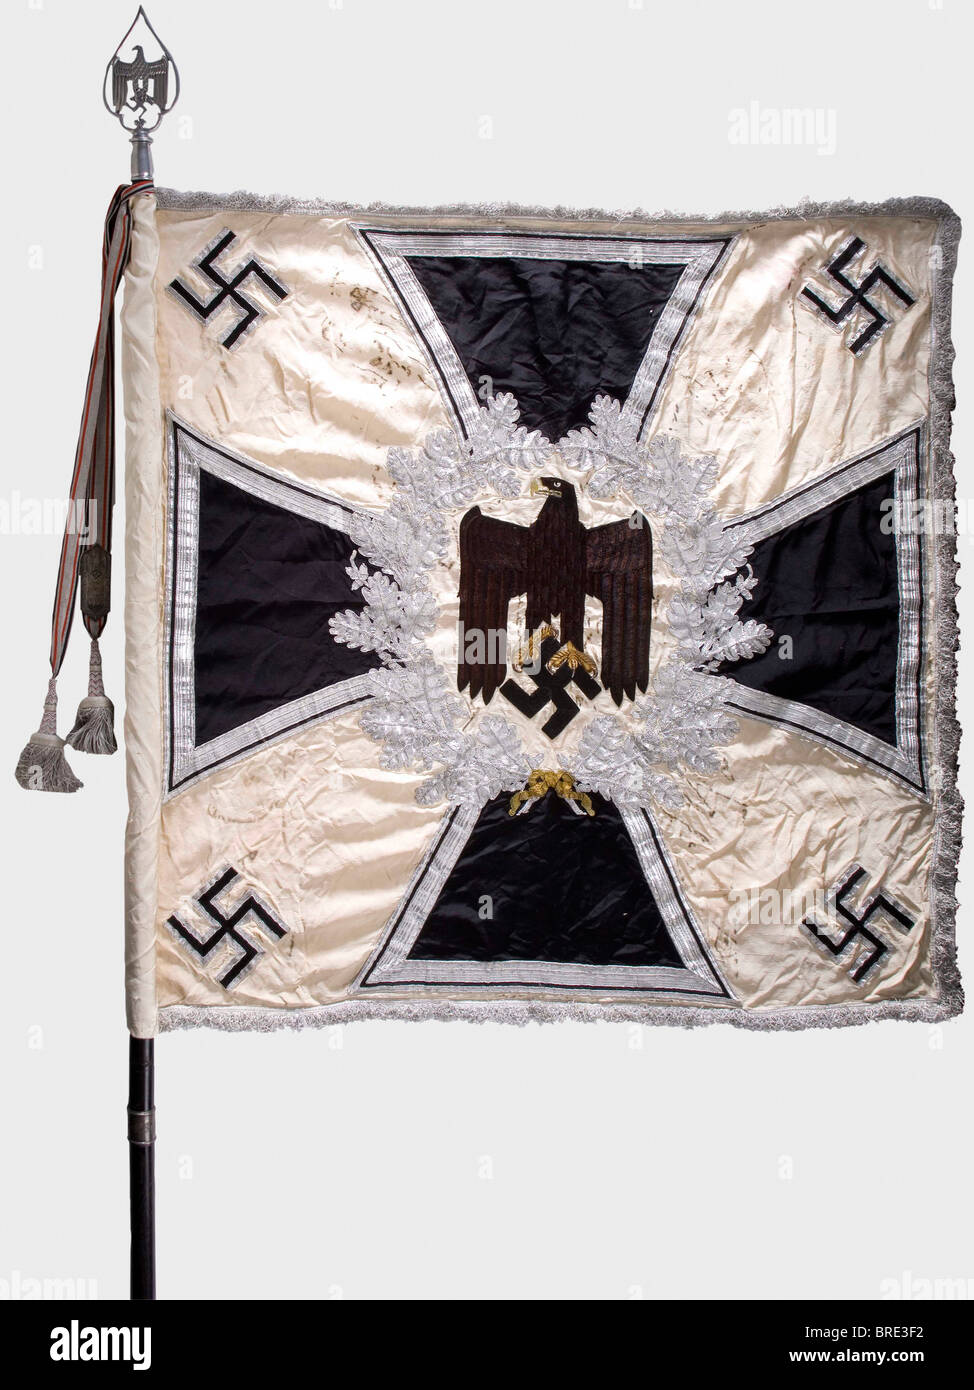 A battalion flag of II Battalion Infantry Regiment 43, complete with pole, finial and banderole White silk cloth fringed with silver on three edges. On both sides a hand-embroidered black army eagle with brown plumage, the beak and claws in gold Posament embroidery on a field of cream-coloured silk, surrounded by a silver embroidered wreath of oak leave historic, historical, 1930s, 20th century, infantry, military, armed forces, militaria, object, objects, stills, clipping, clippings, cut out, cut-out, cut-outs, insignia, symbols, symbol, badge, badges, honor, , Stock Photo